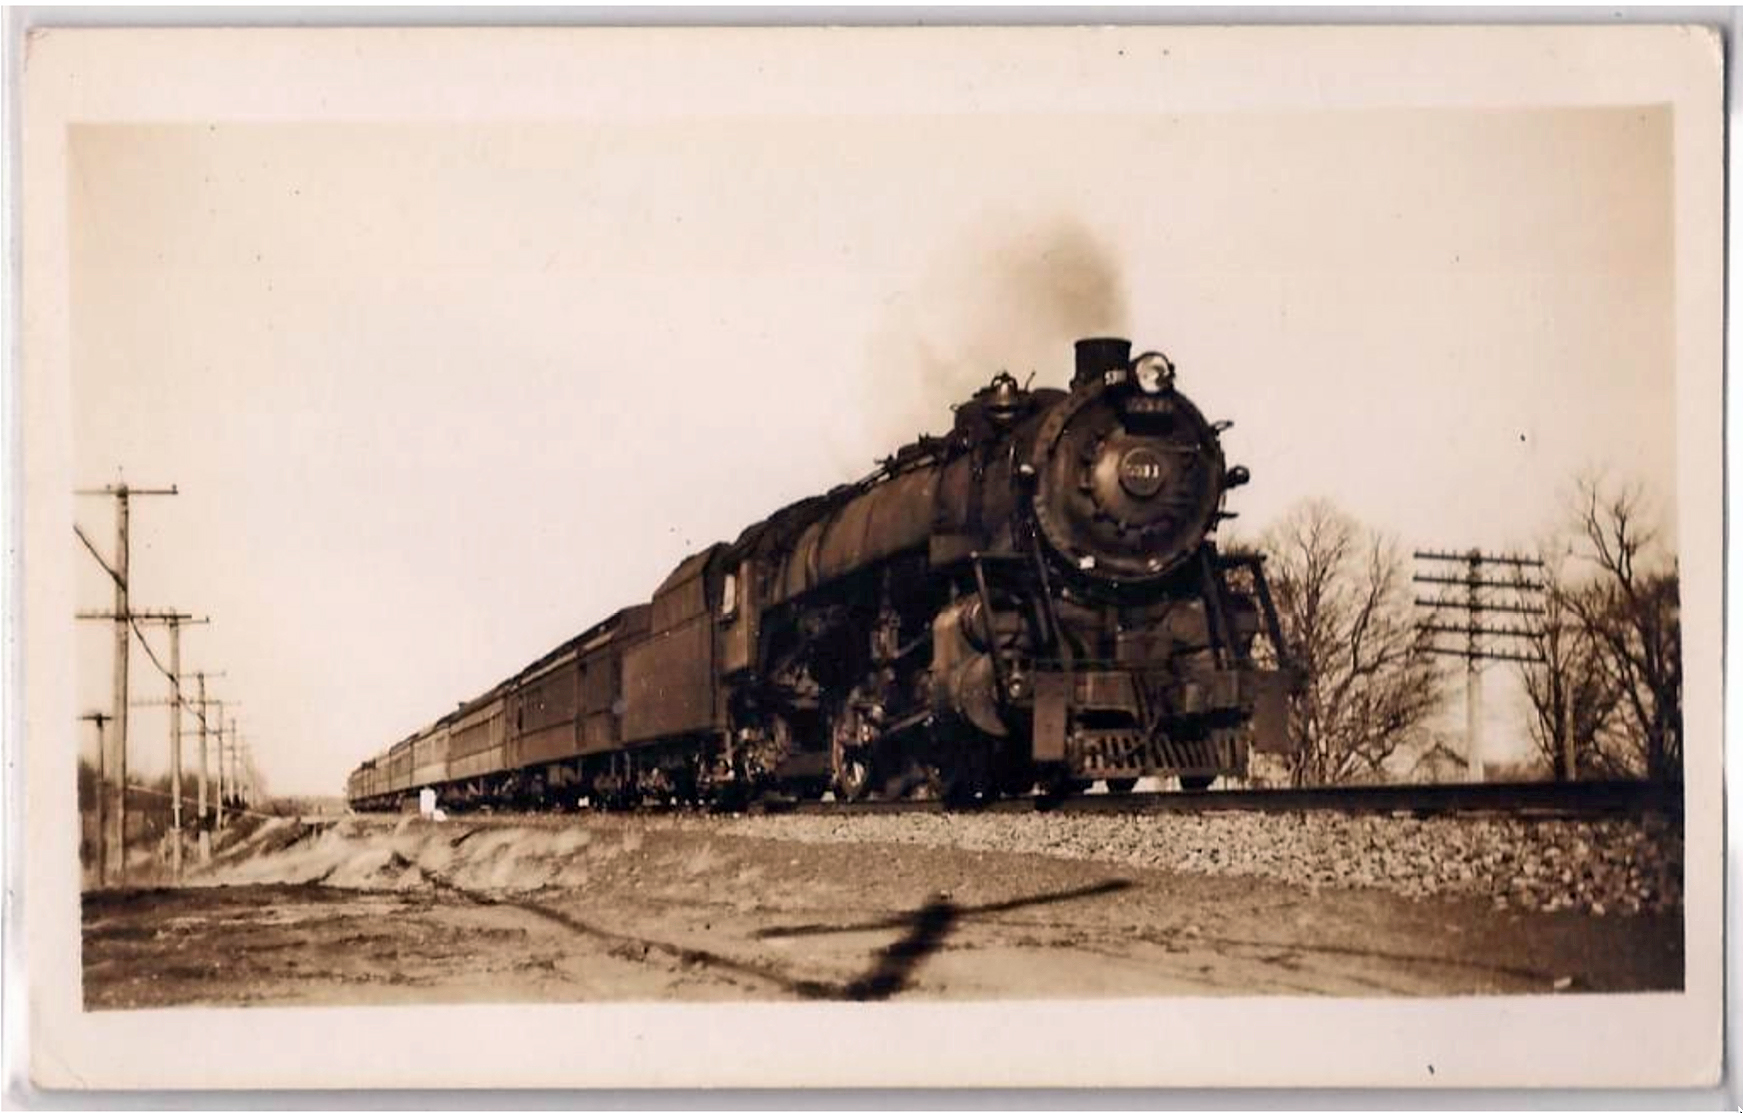 Franklin vicinity - Said to be a Steam Train with Locomotive 531